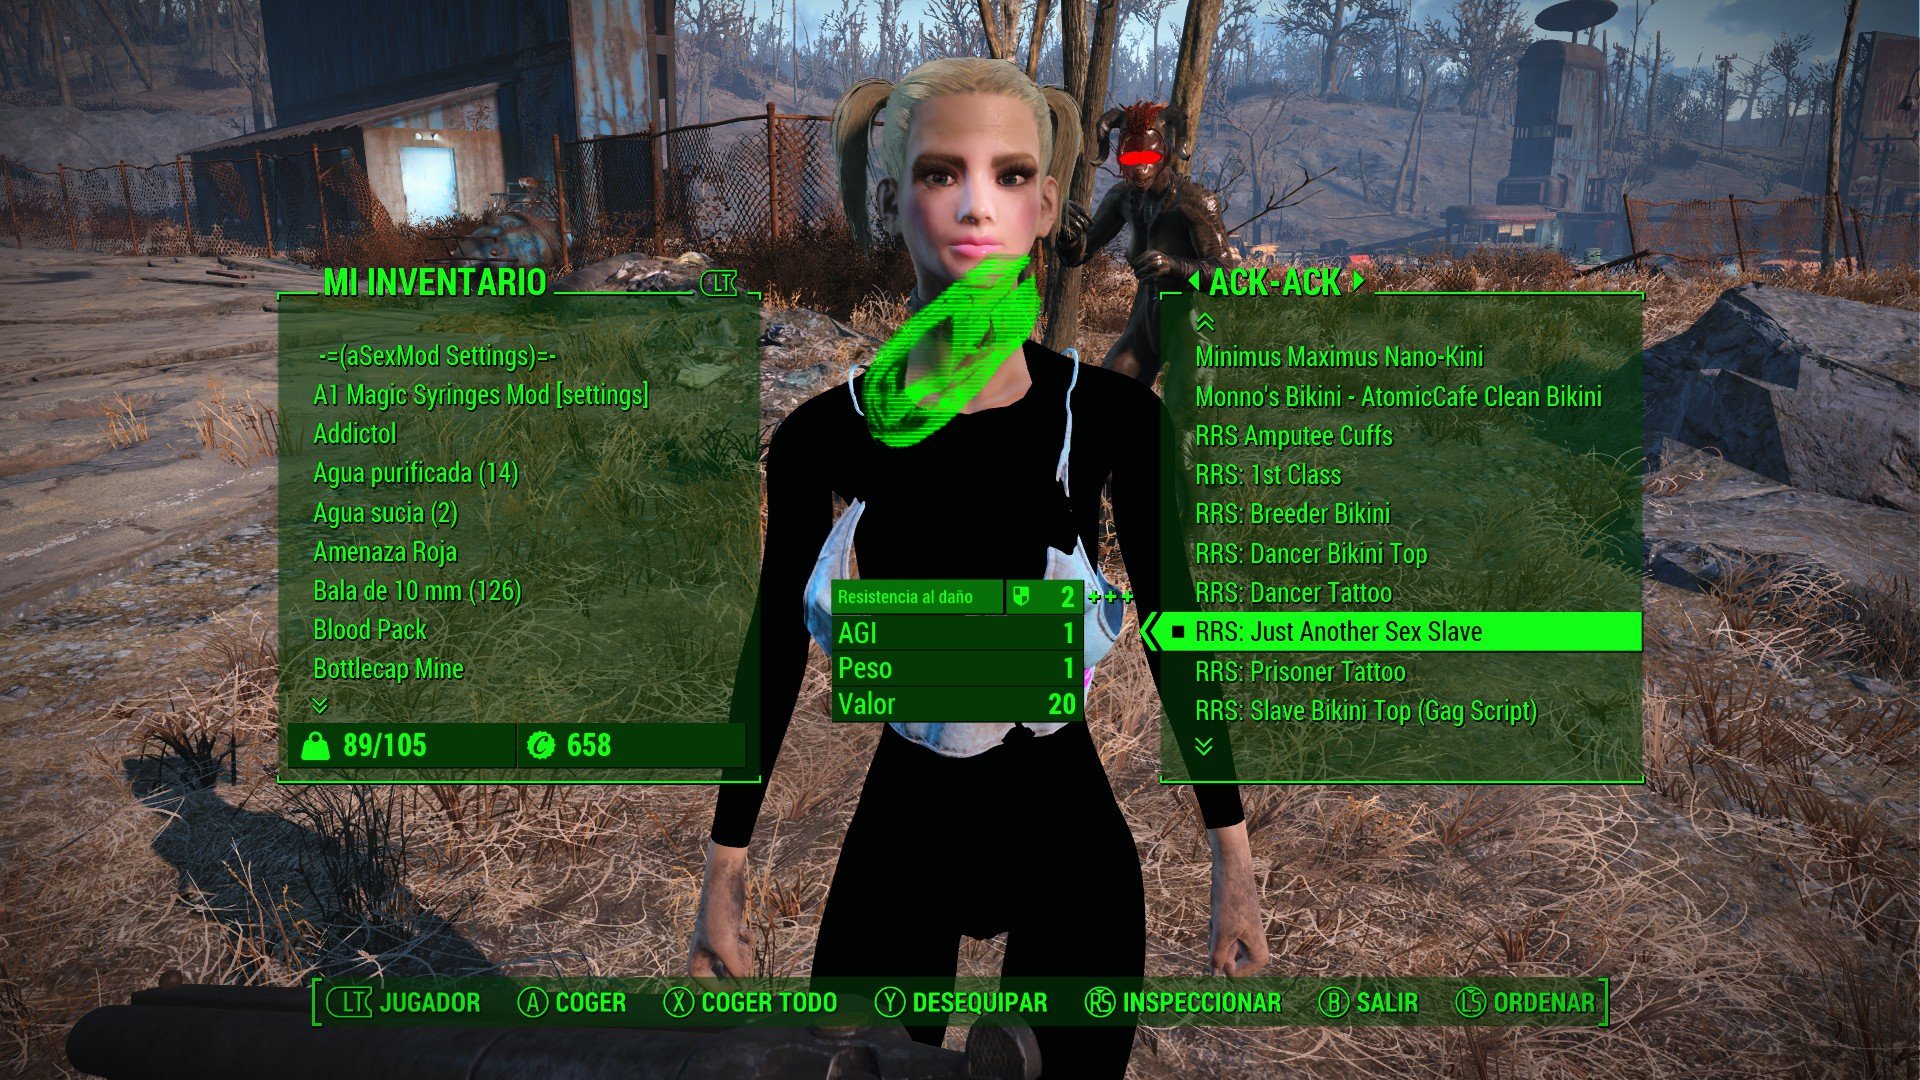 Raider Reform School Page 23 Downloads Fallout 4 Adult And Sex Mods